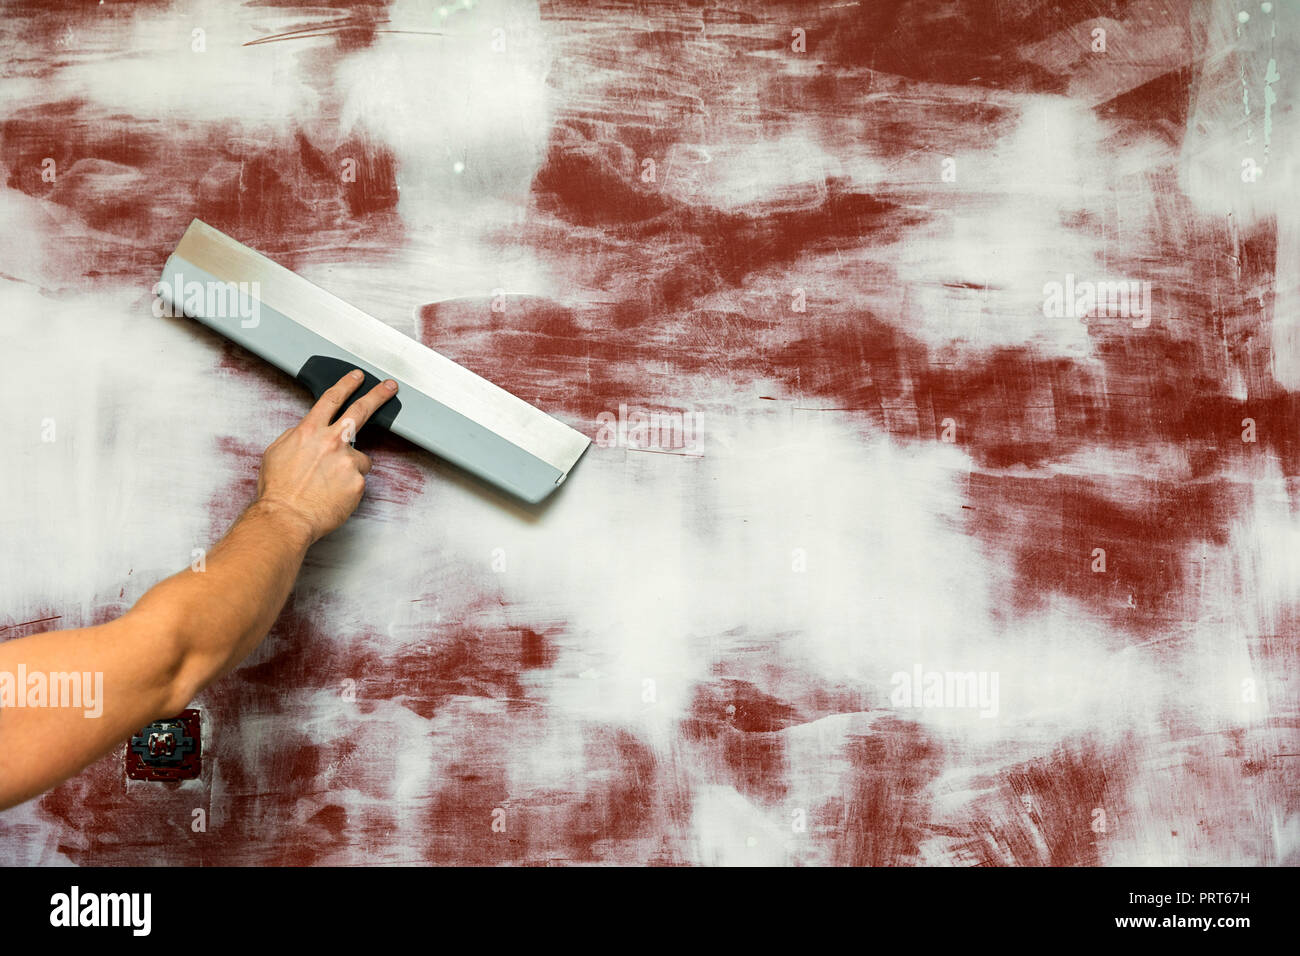 hand with taping knife plastering wall. copy space Stock Photo